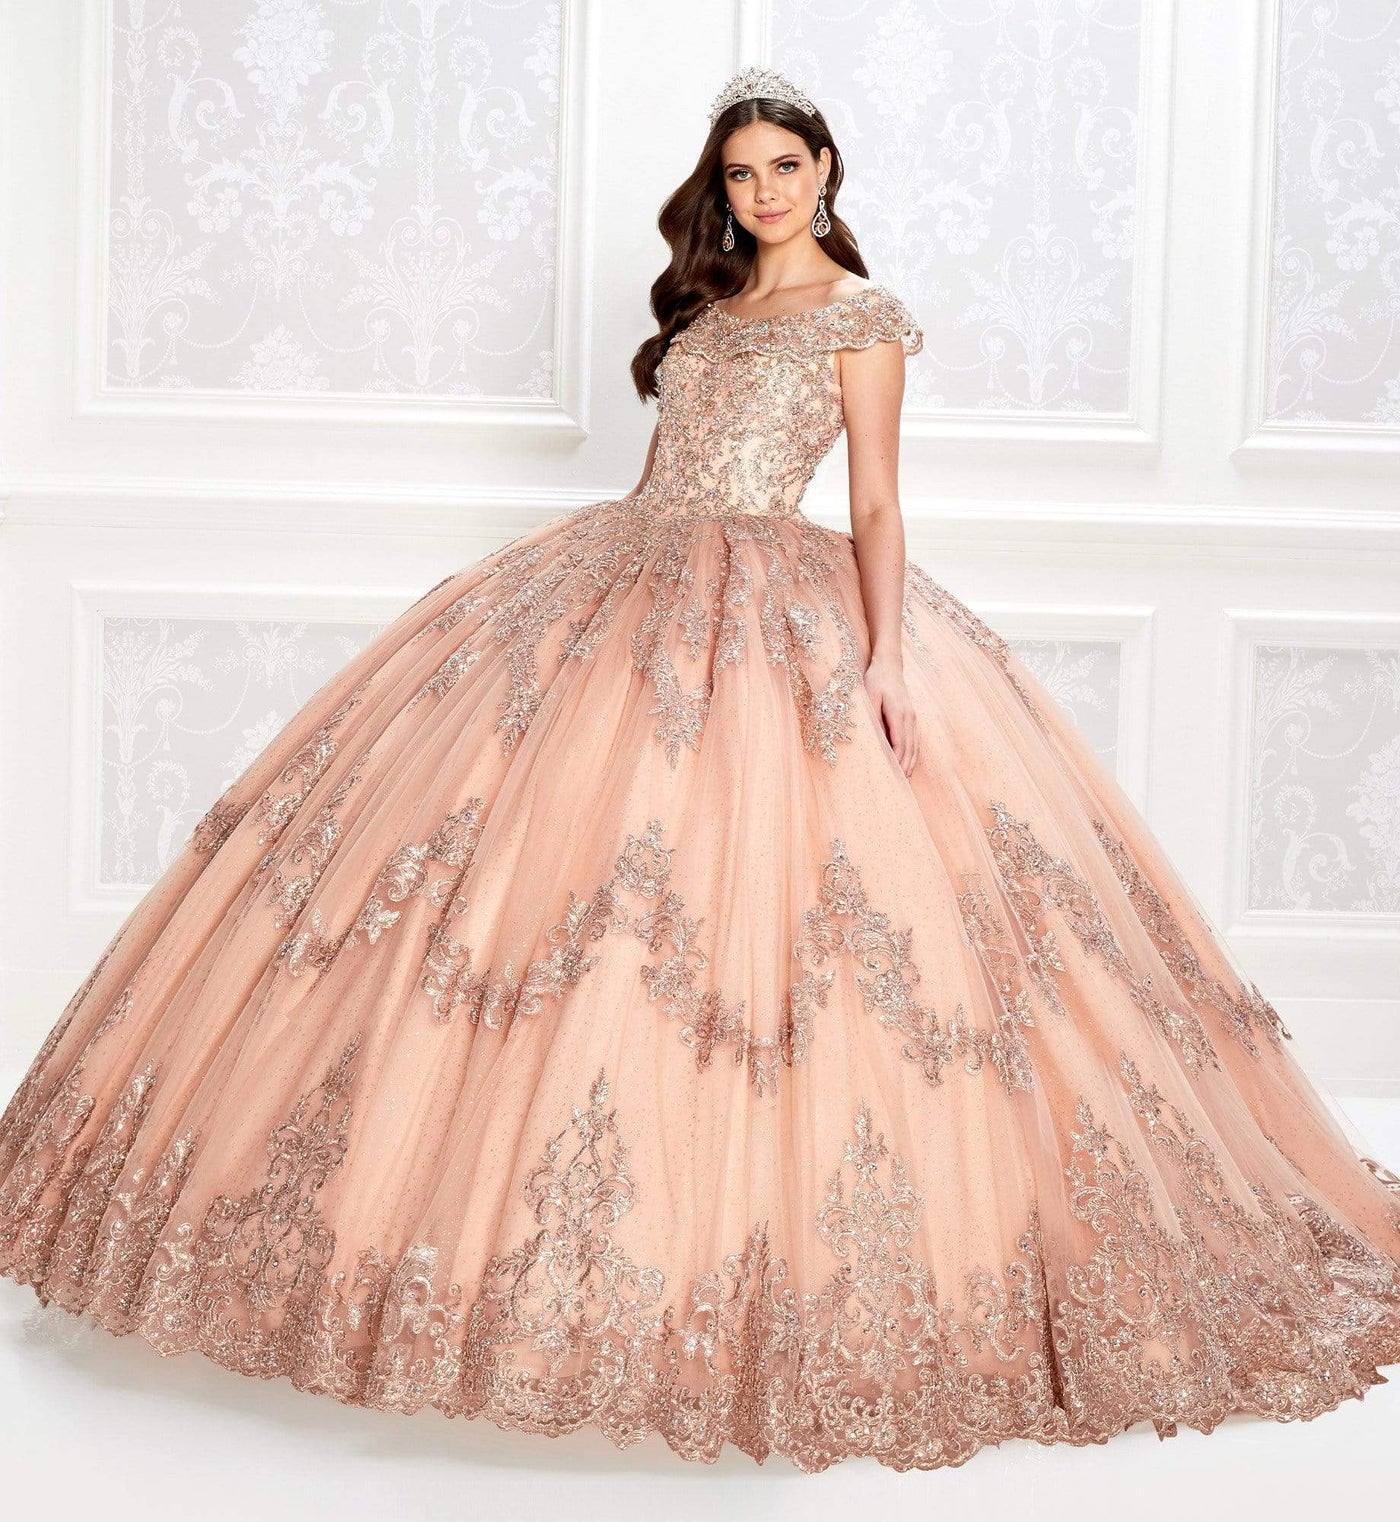 Princesa by Ariana Vara - PR22035 Scoop Neck Ball Gown Quinceanera Dresses 00 / Rose Gold